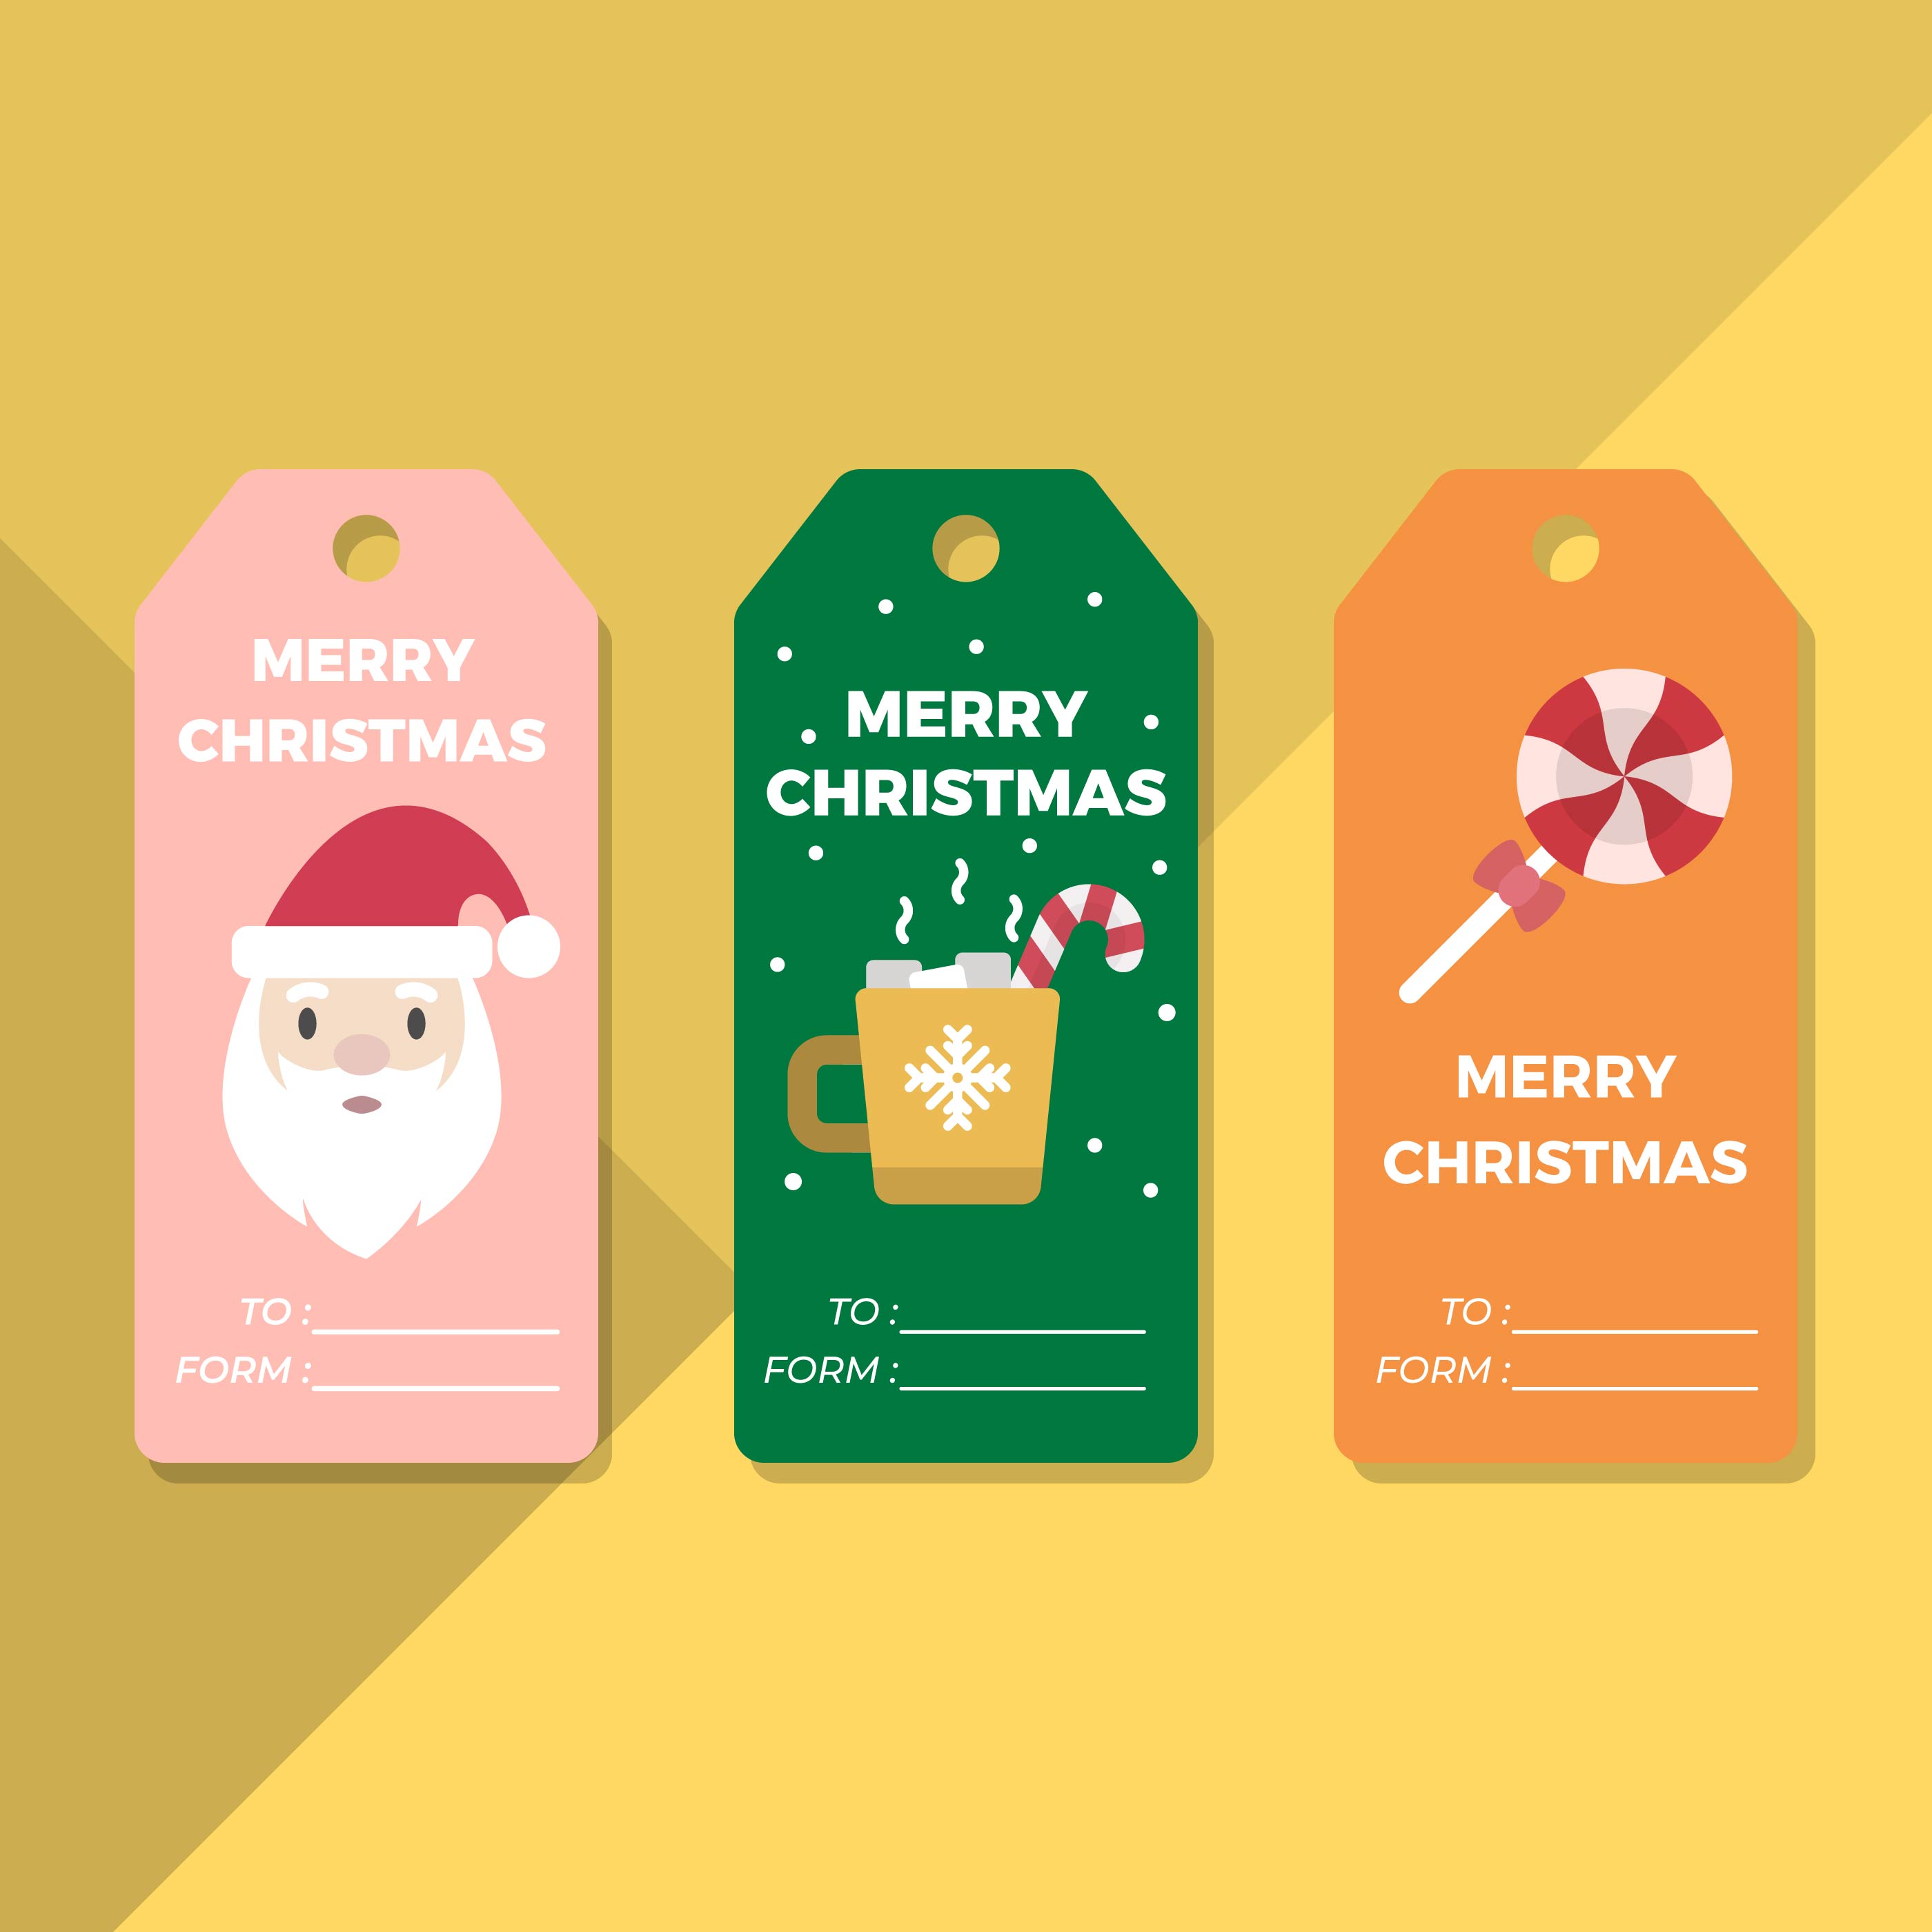 Download Flat Holiday Gift Tags Vector Template - Download Free ...